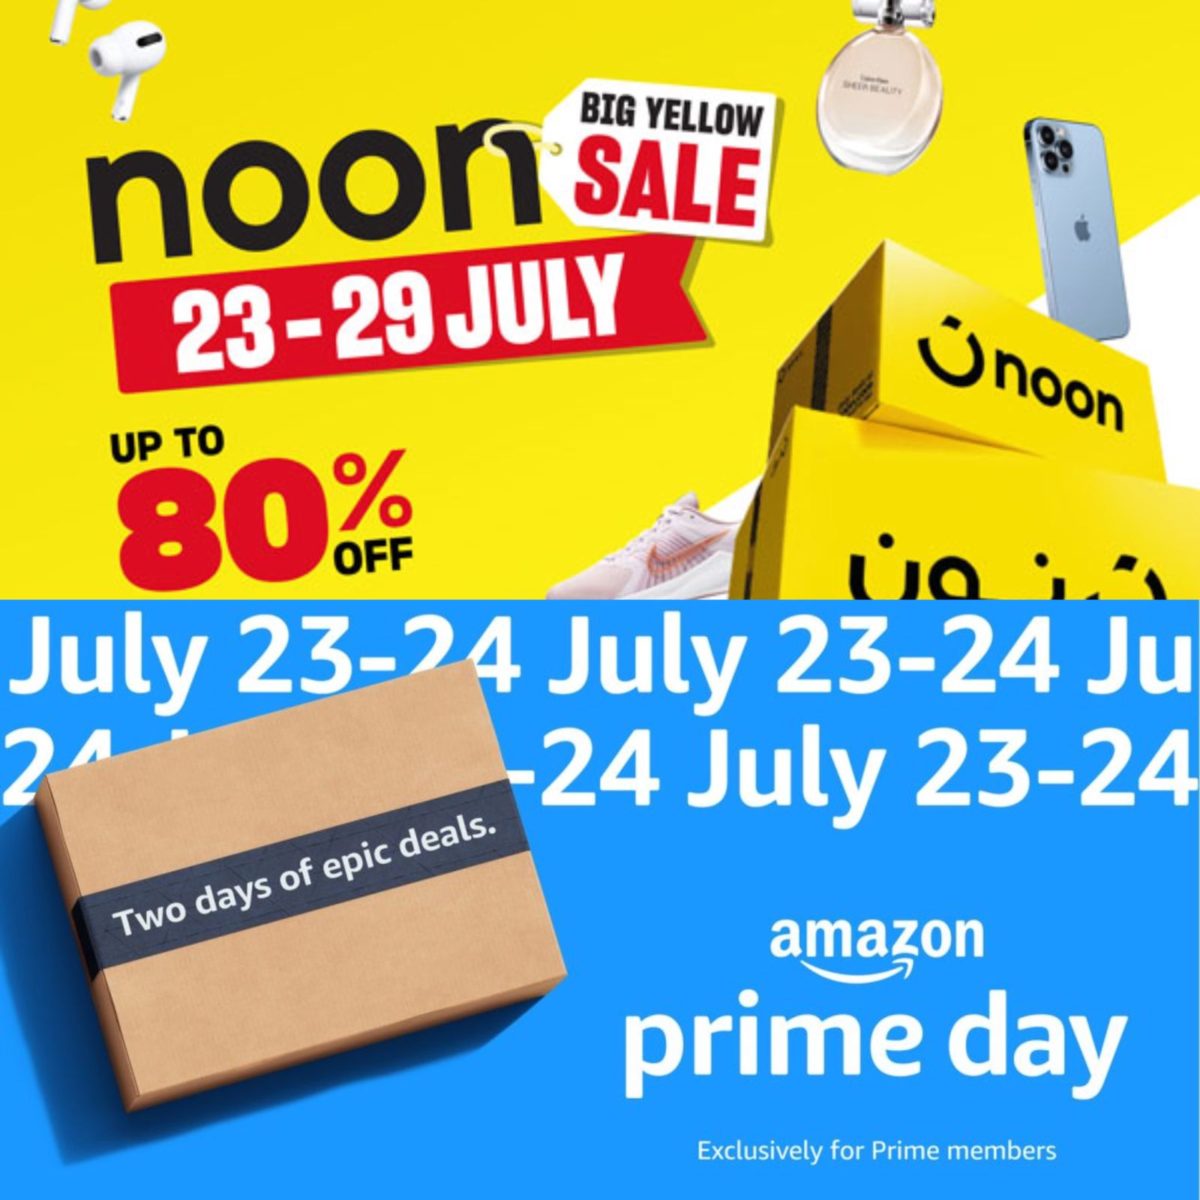 Noon and Amazon summer sale starts from today midnight in the UAE